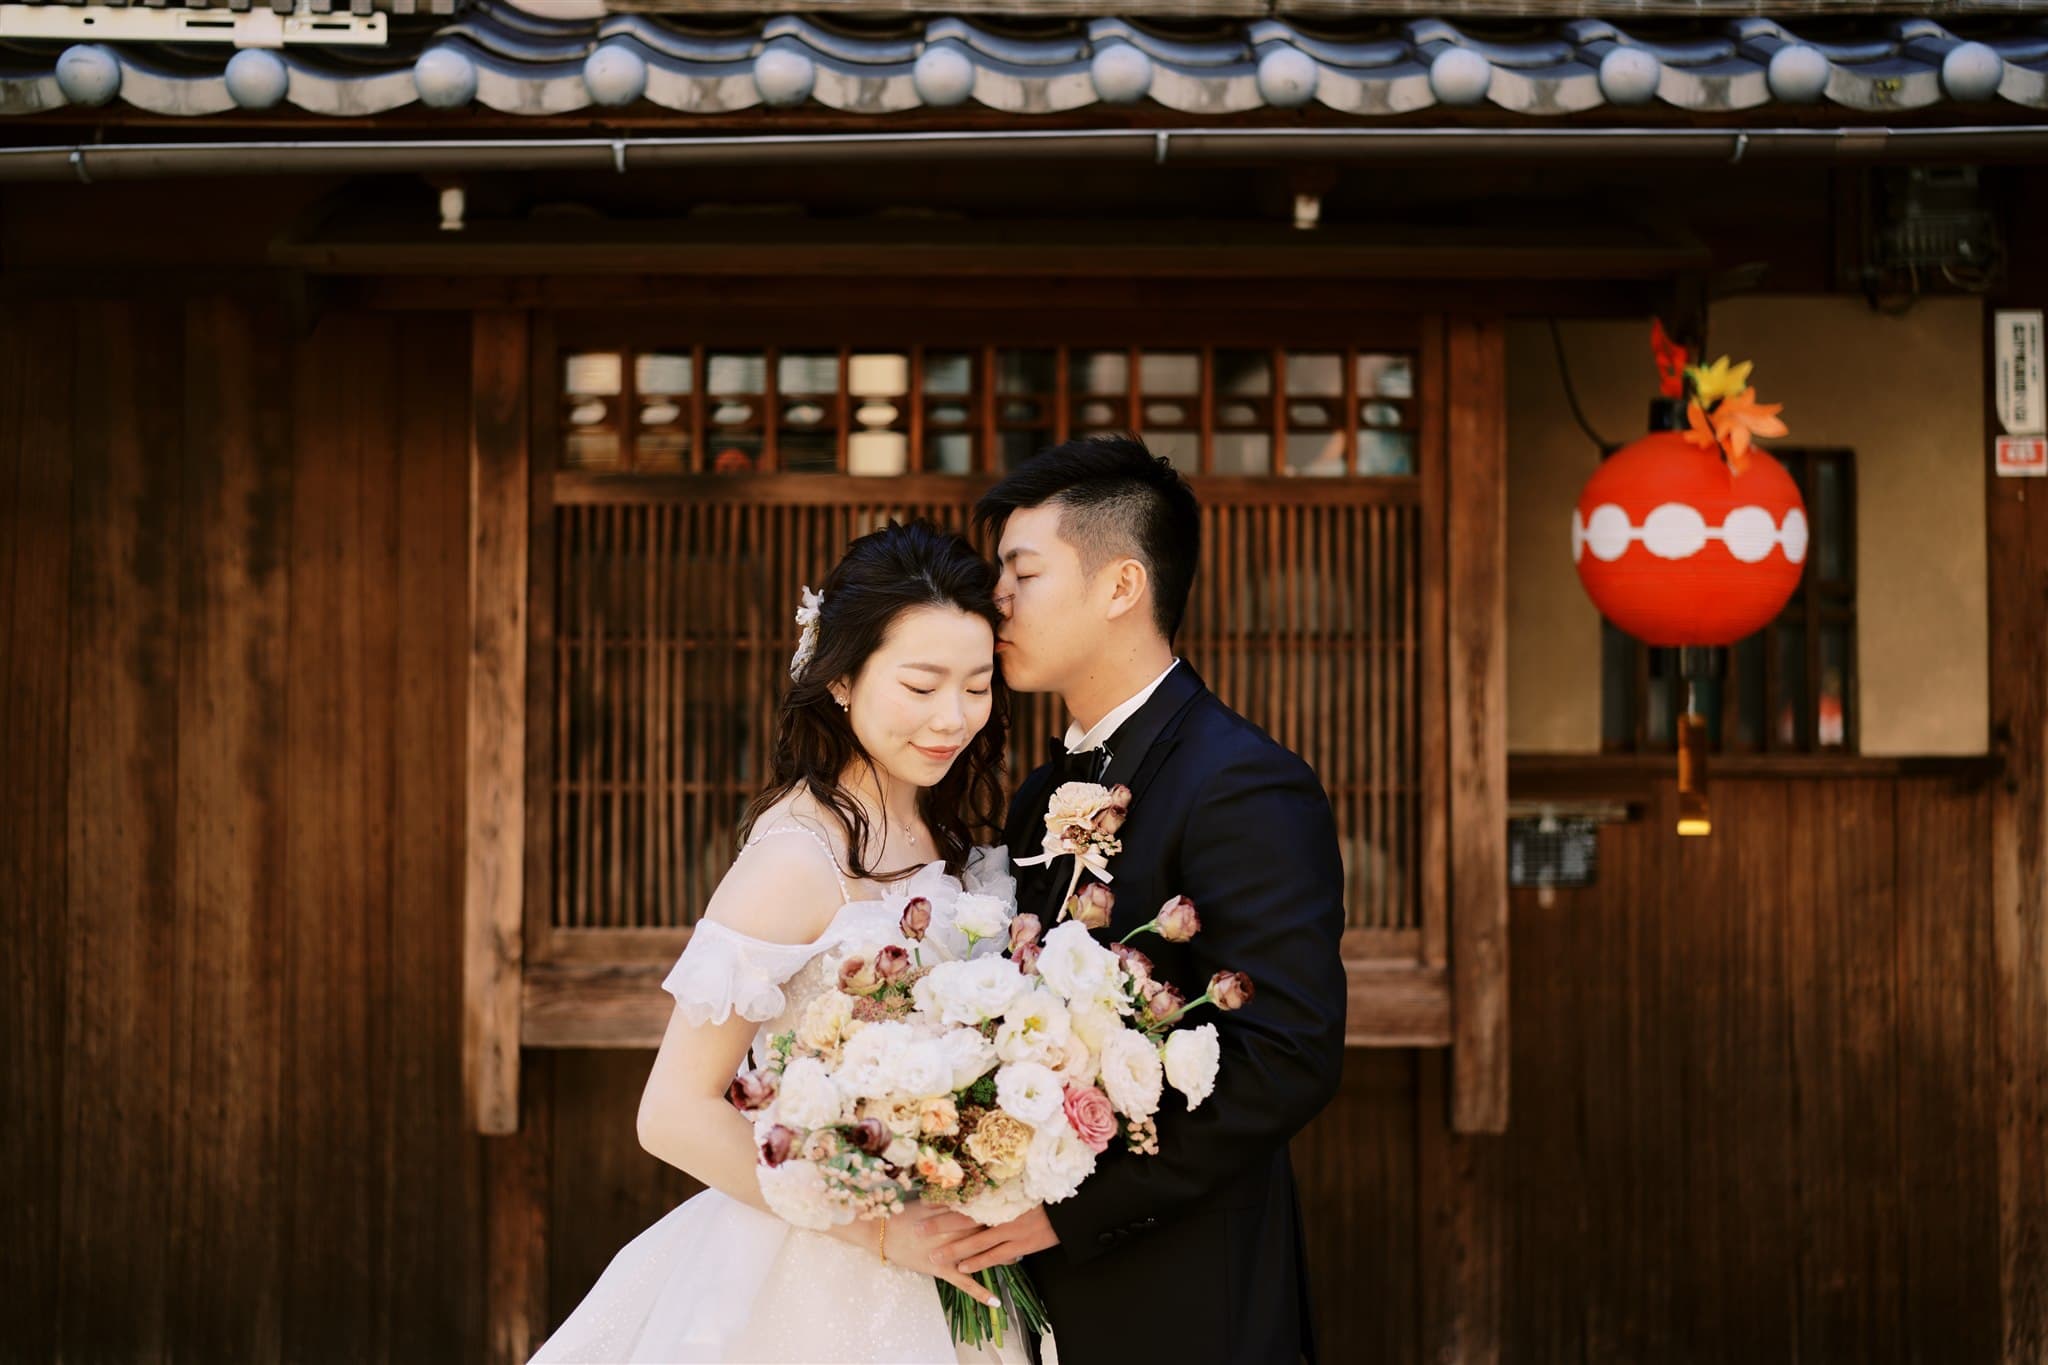 Kyoto Tokyo Japan Elopement Wedding Photographer, Planner & Videographer | A bride and groom, captured by a Japan elopement photographer, posing in front of a traditional Japanese house.